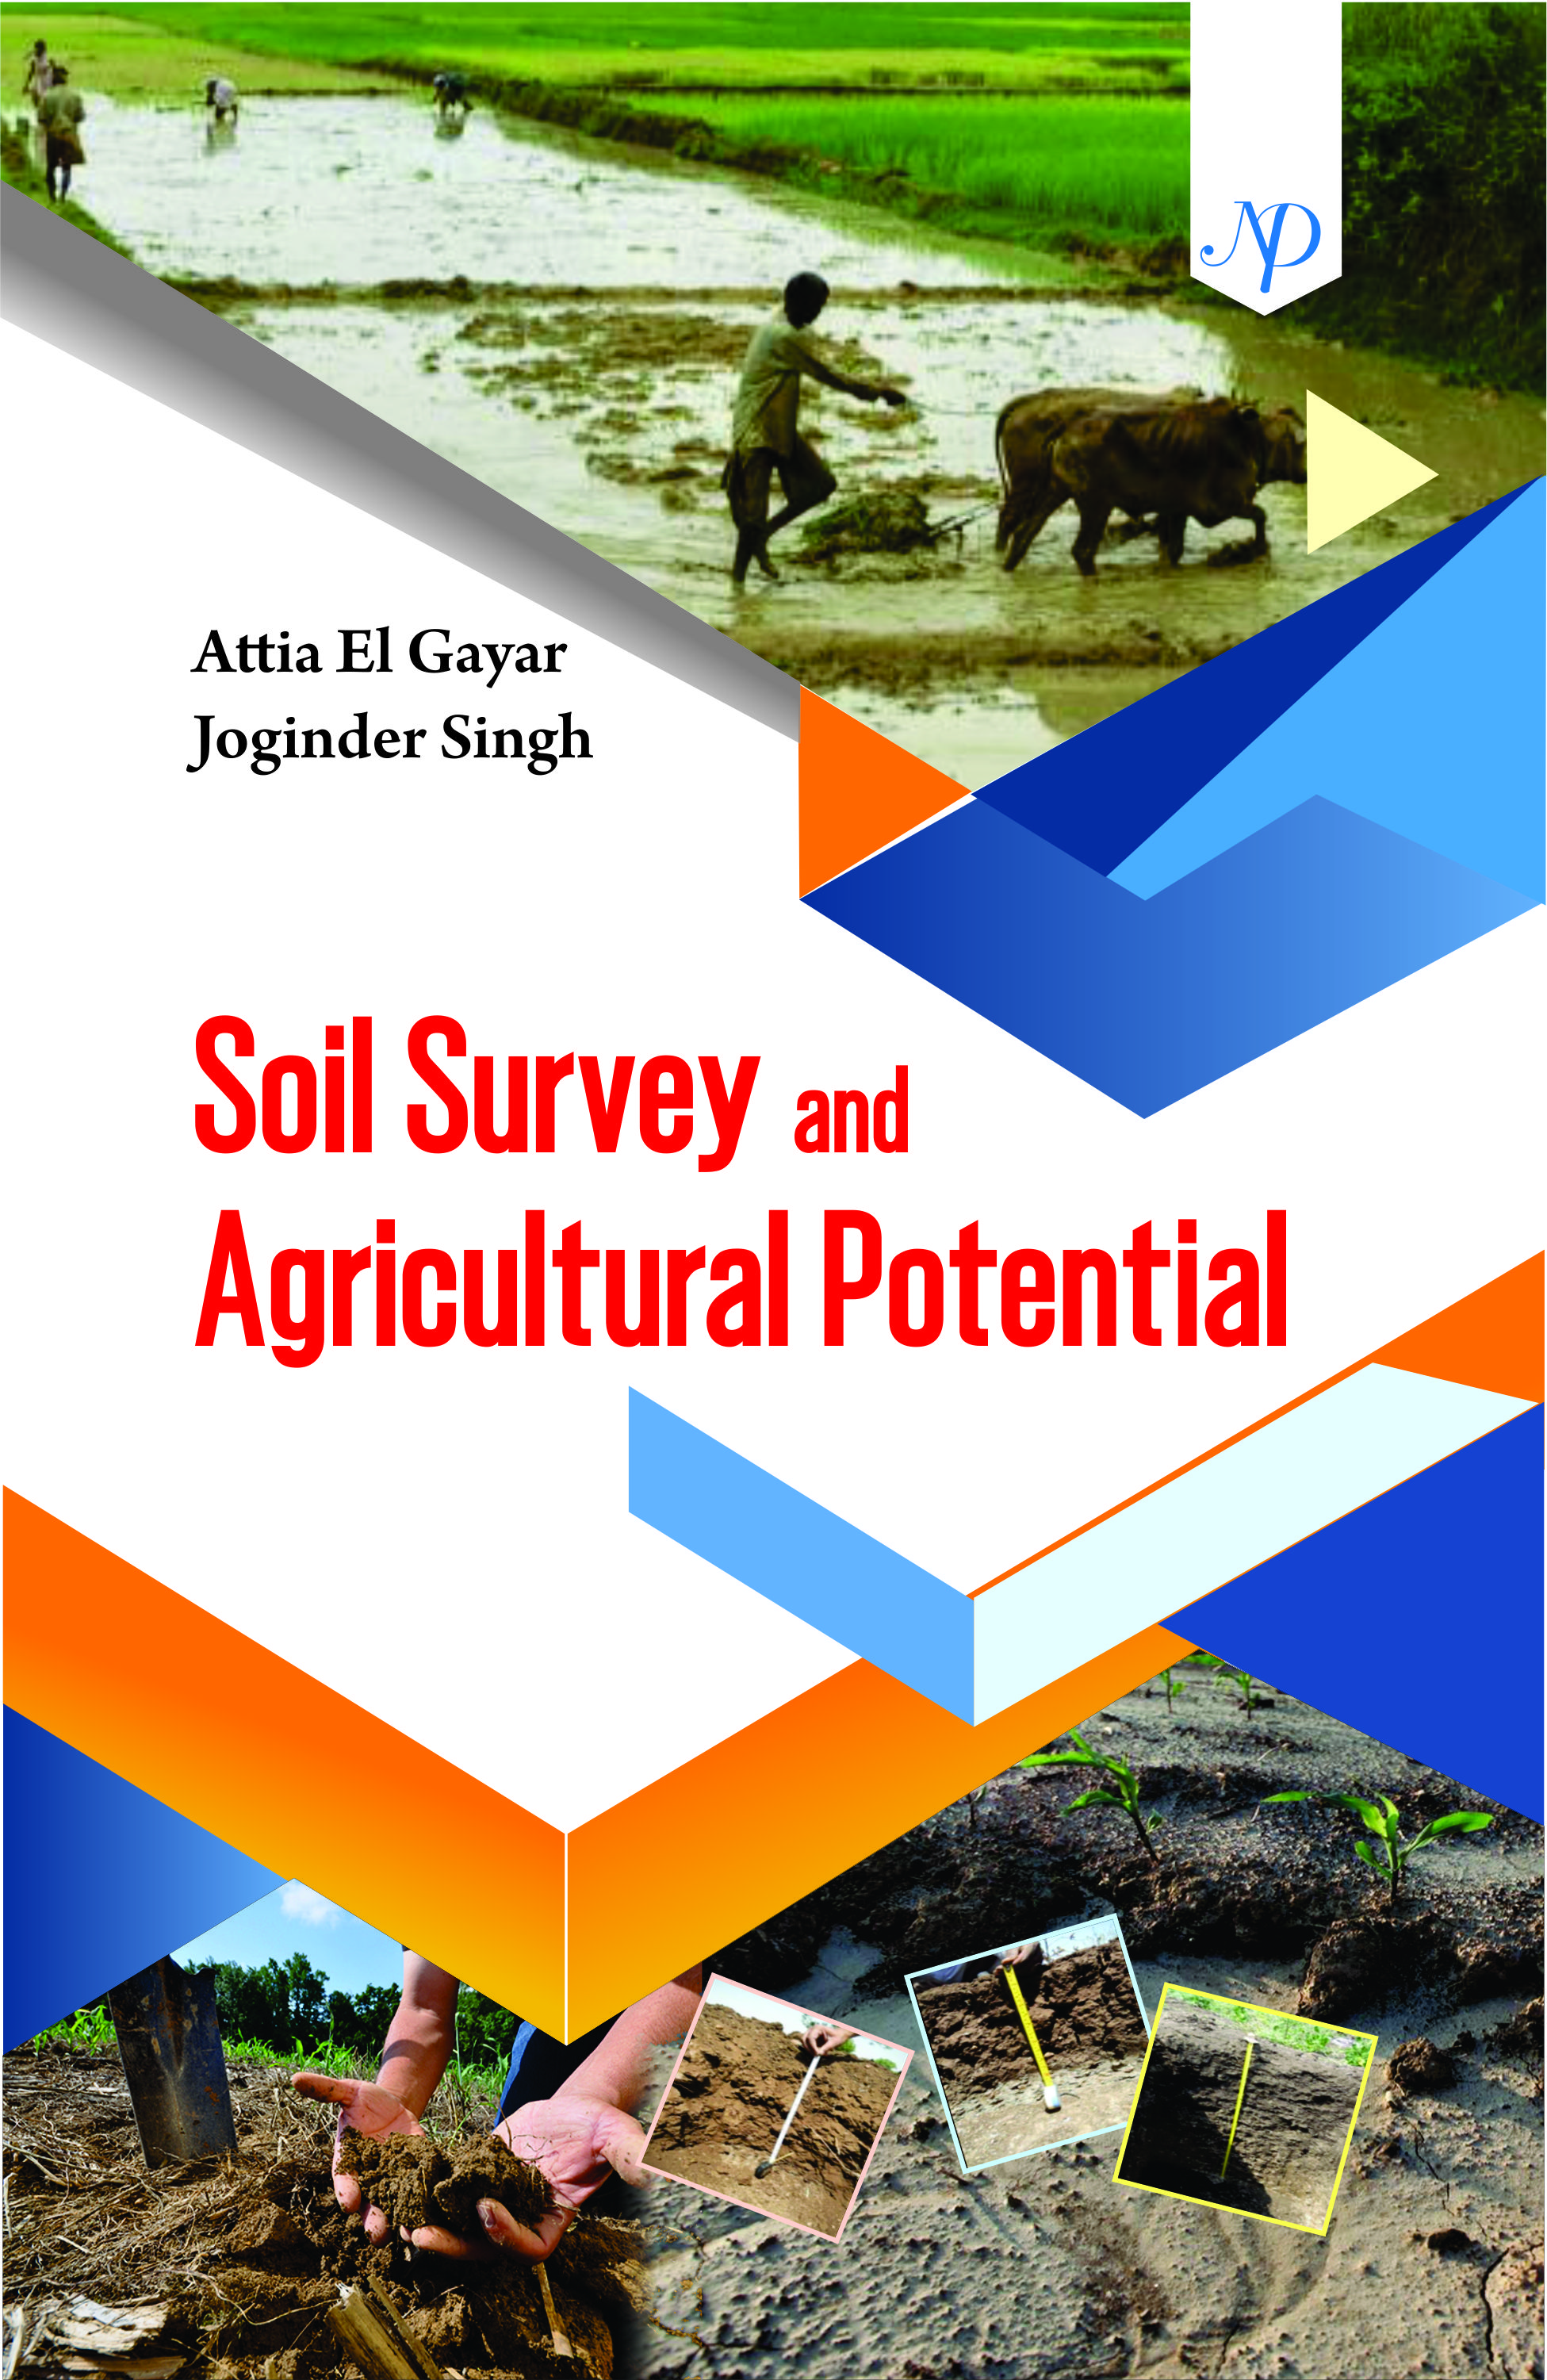 Soil Survey and Agriculture Potential Cover.jpg